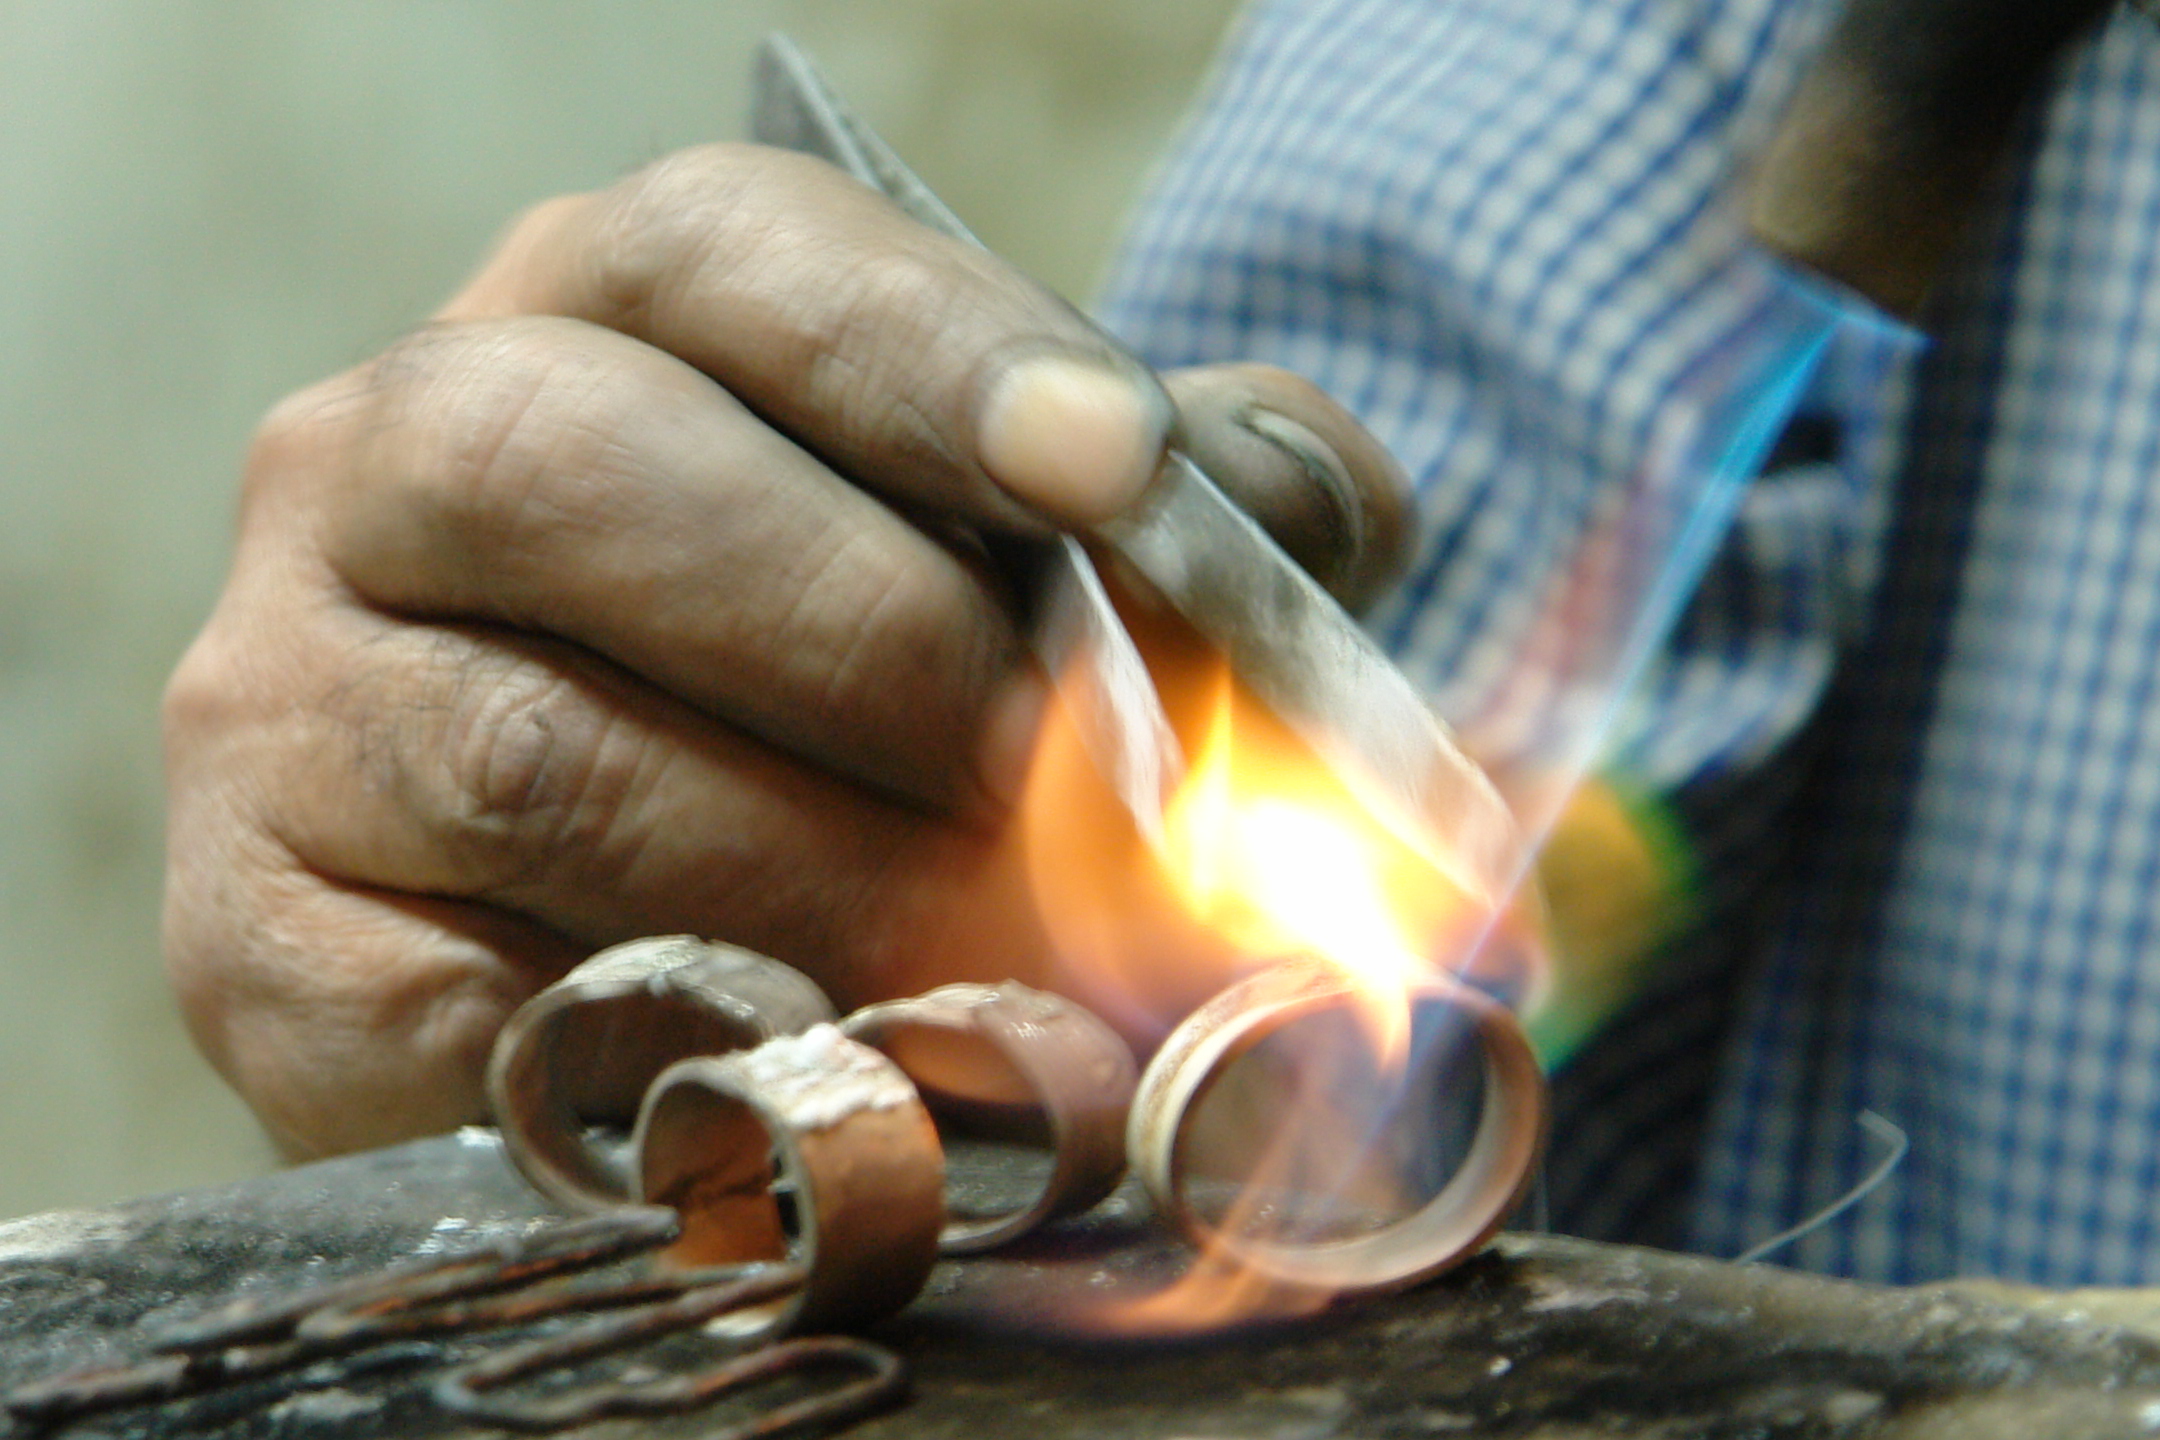 a person is welding some pieces of metal with an iron scissors